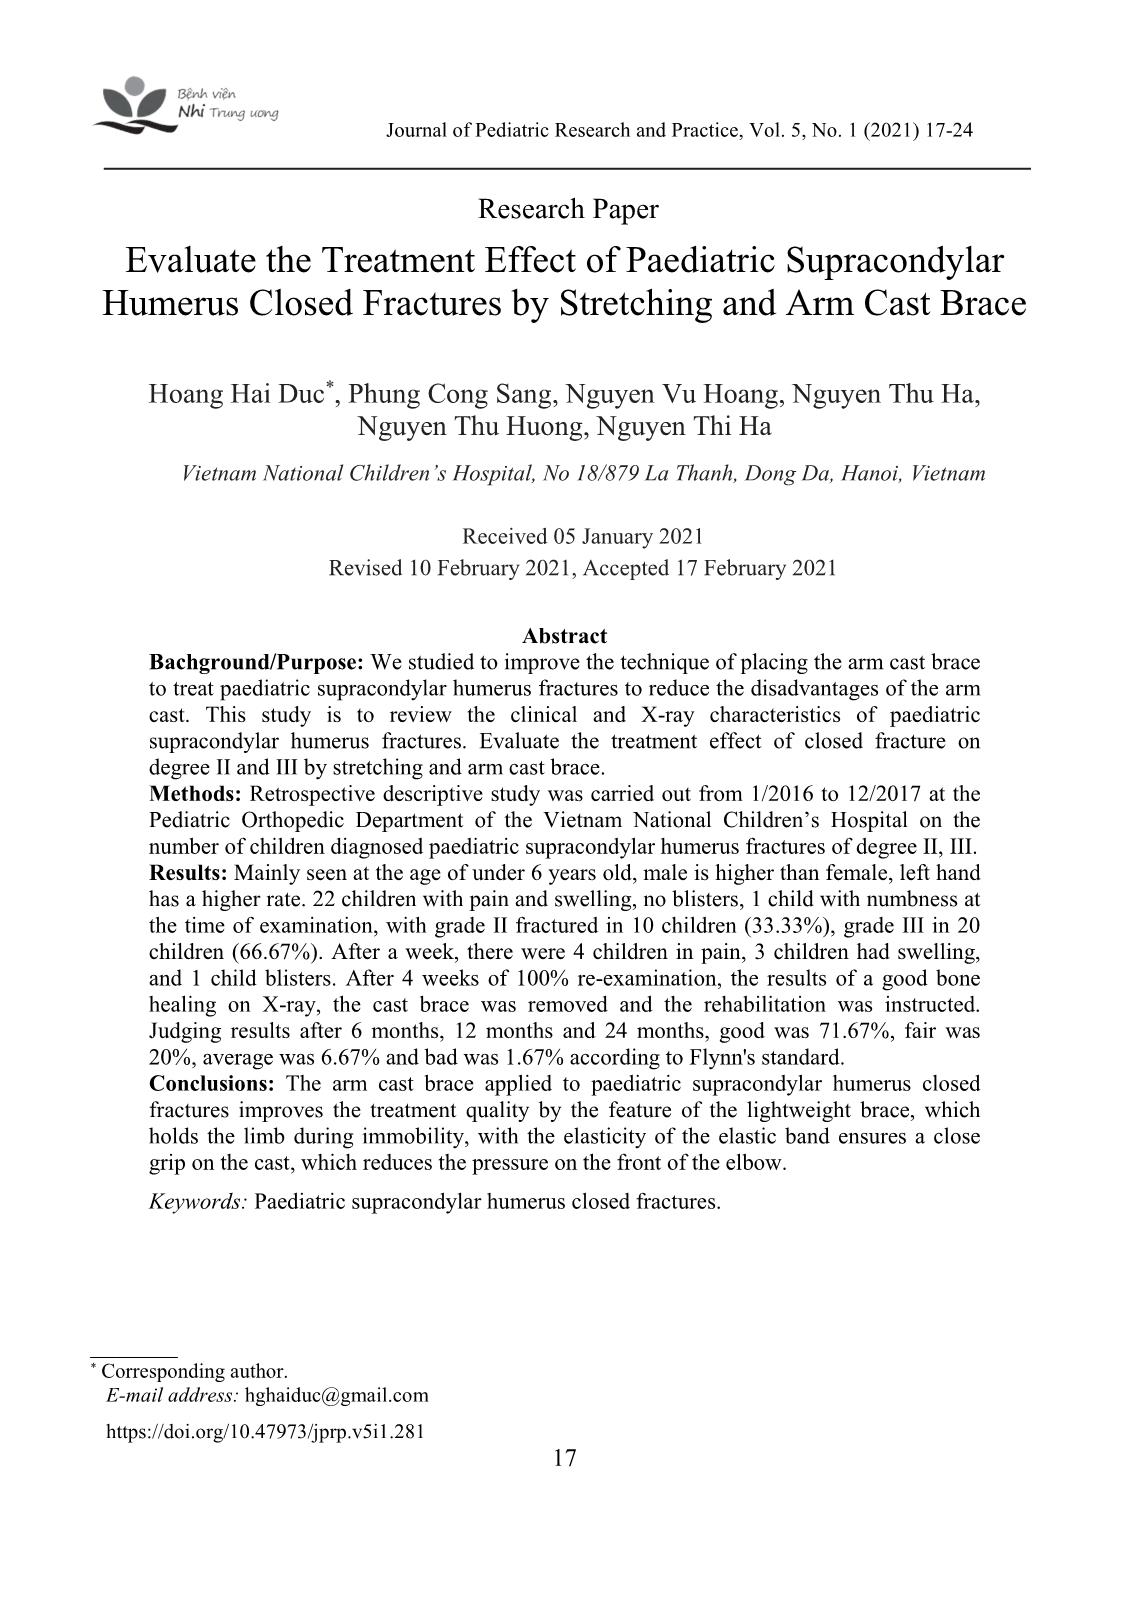 Evaluate the treatment effect of paediatric supracondylar humerus closed fractures by stretching and arm cast brace trang 1